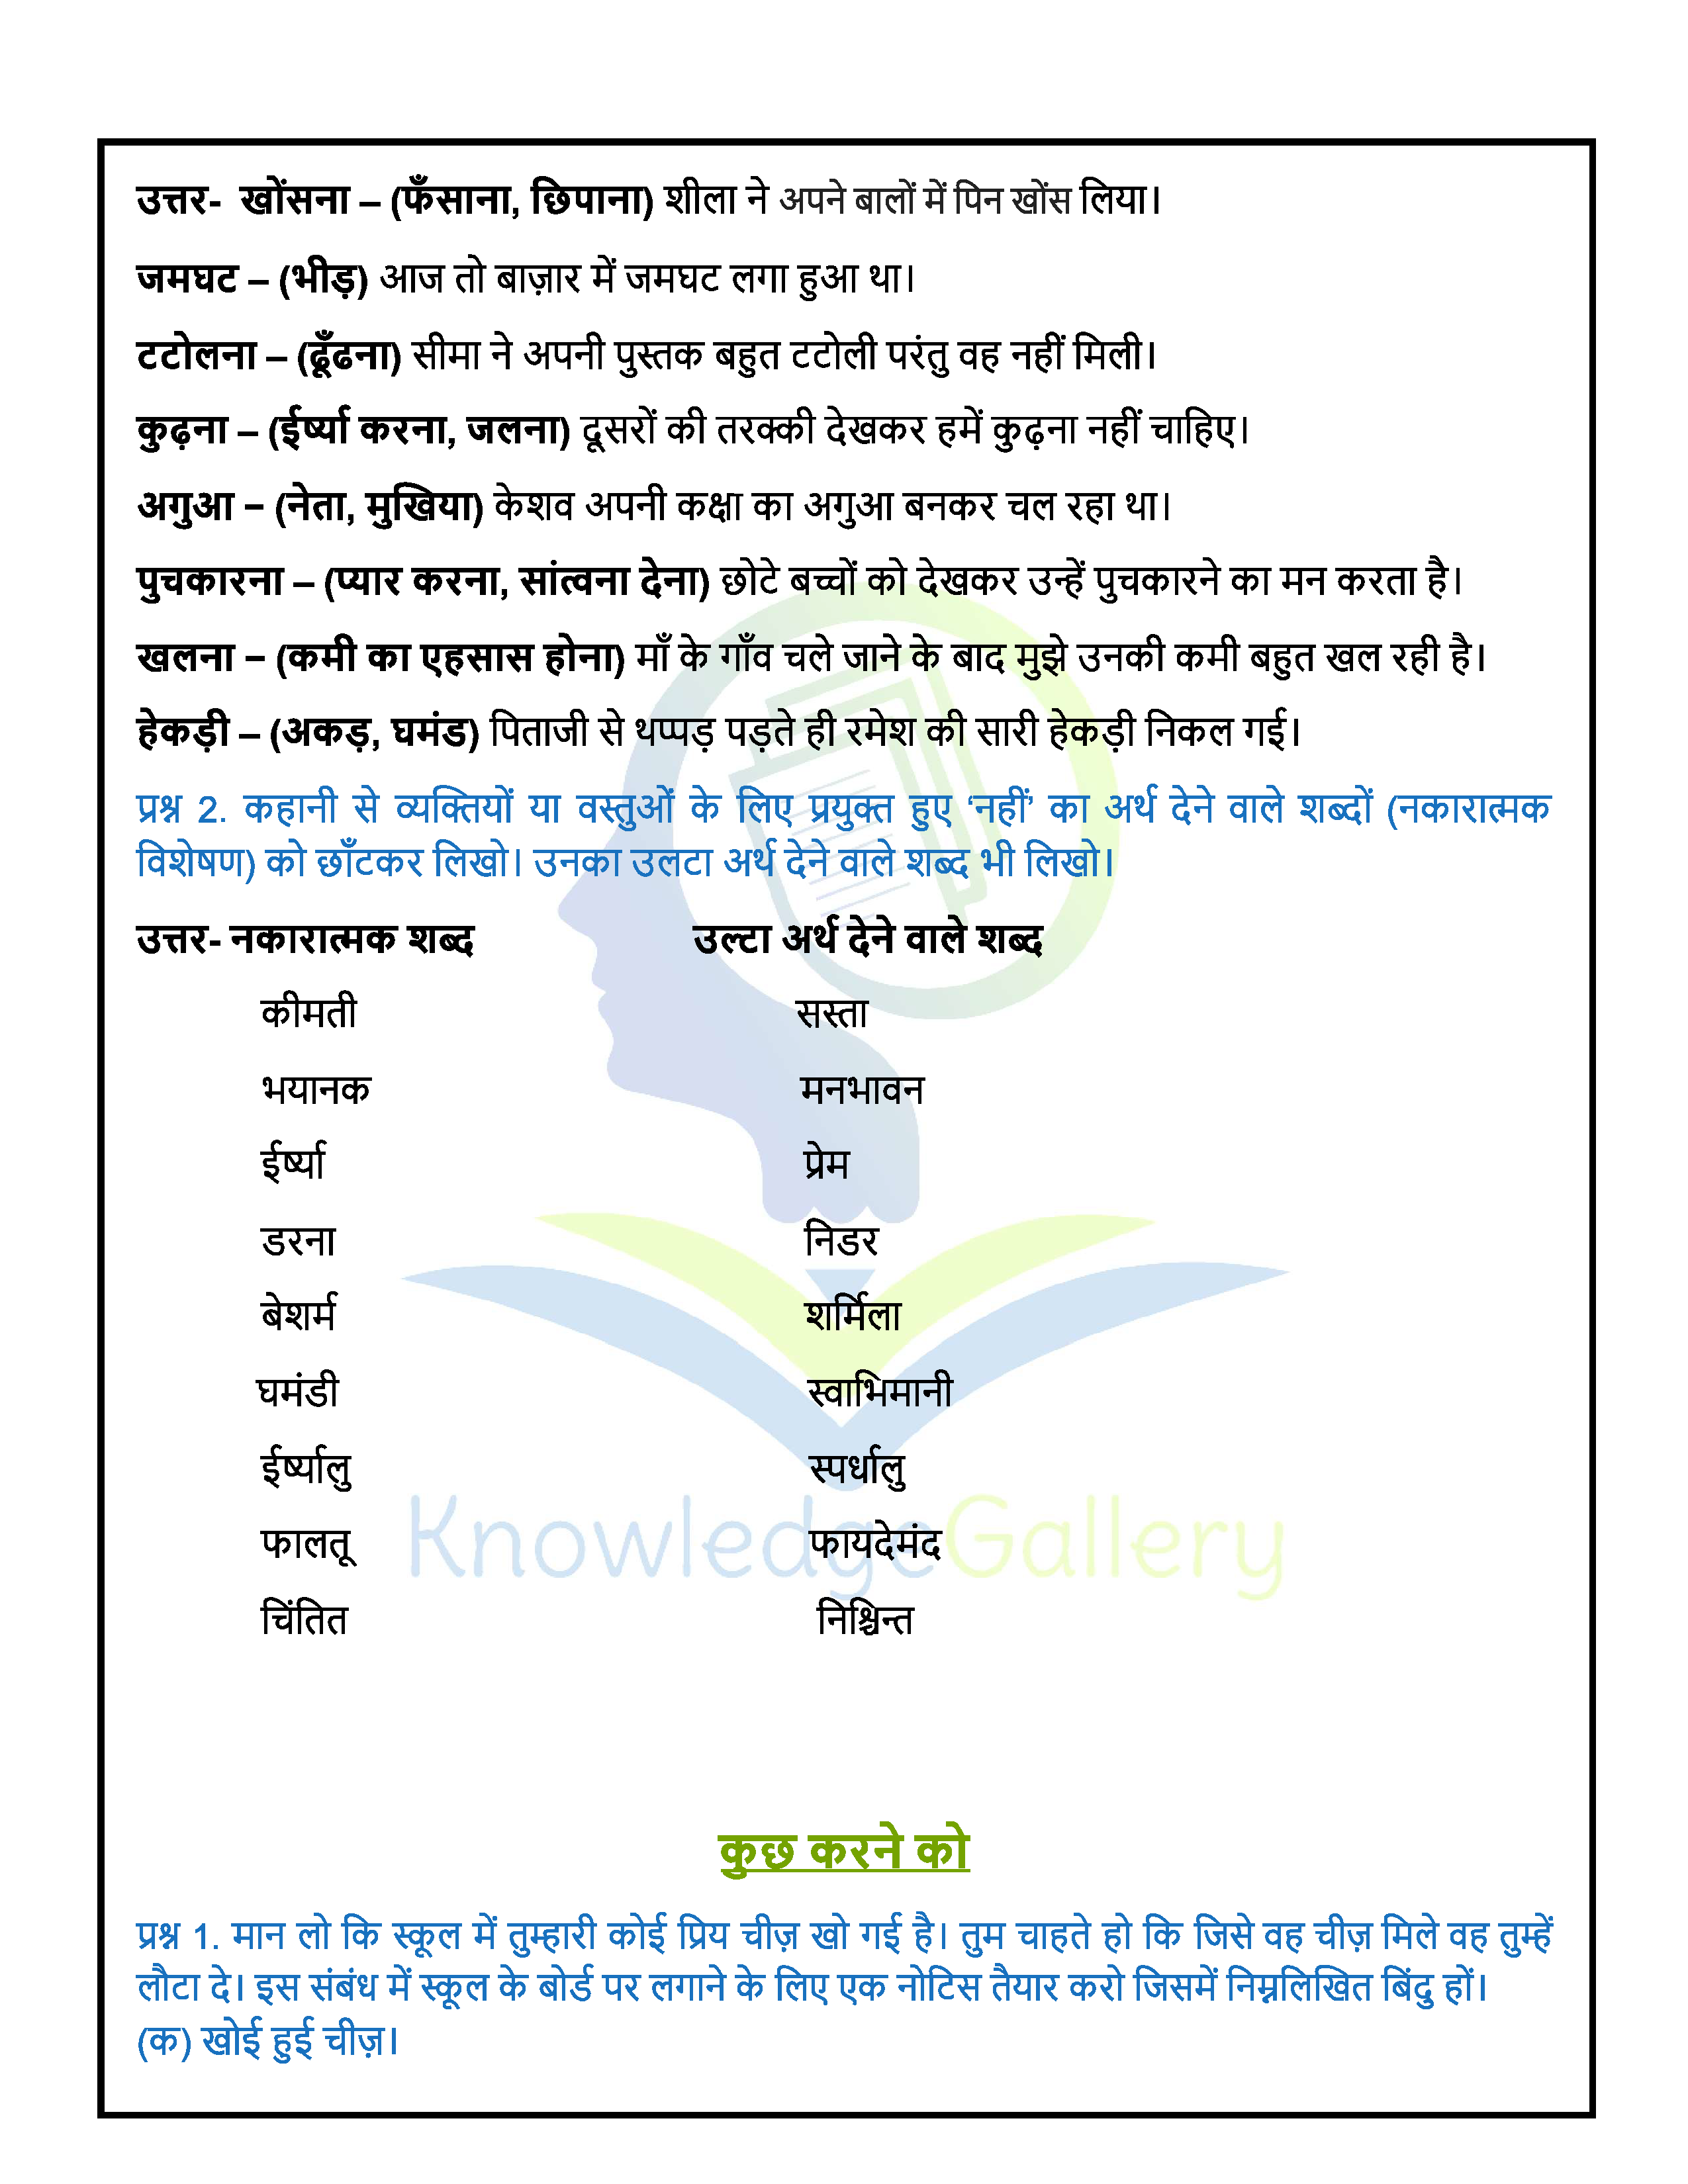 NCERT Solution For Class 6 Hindi Chapter 9 part 4